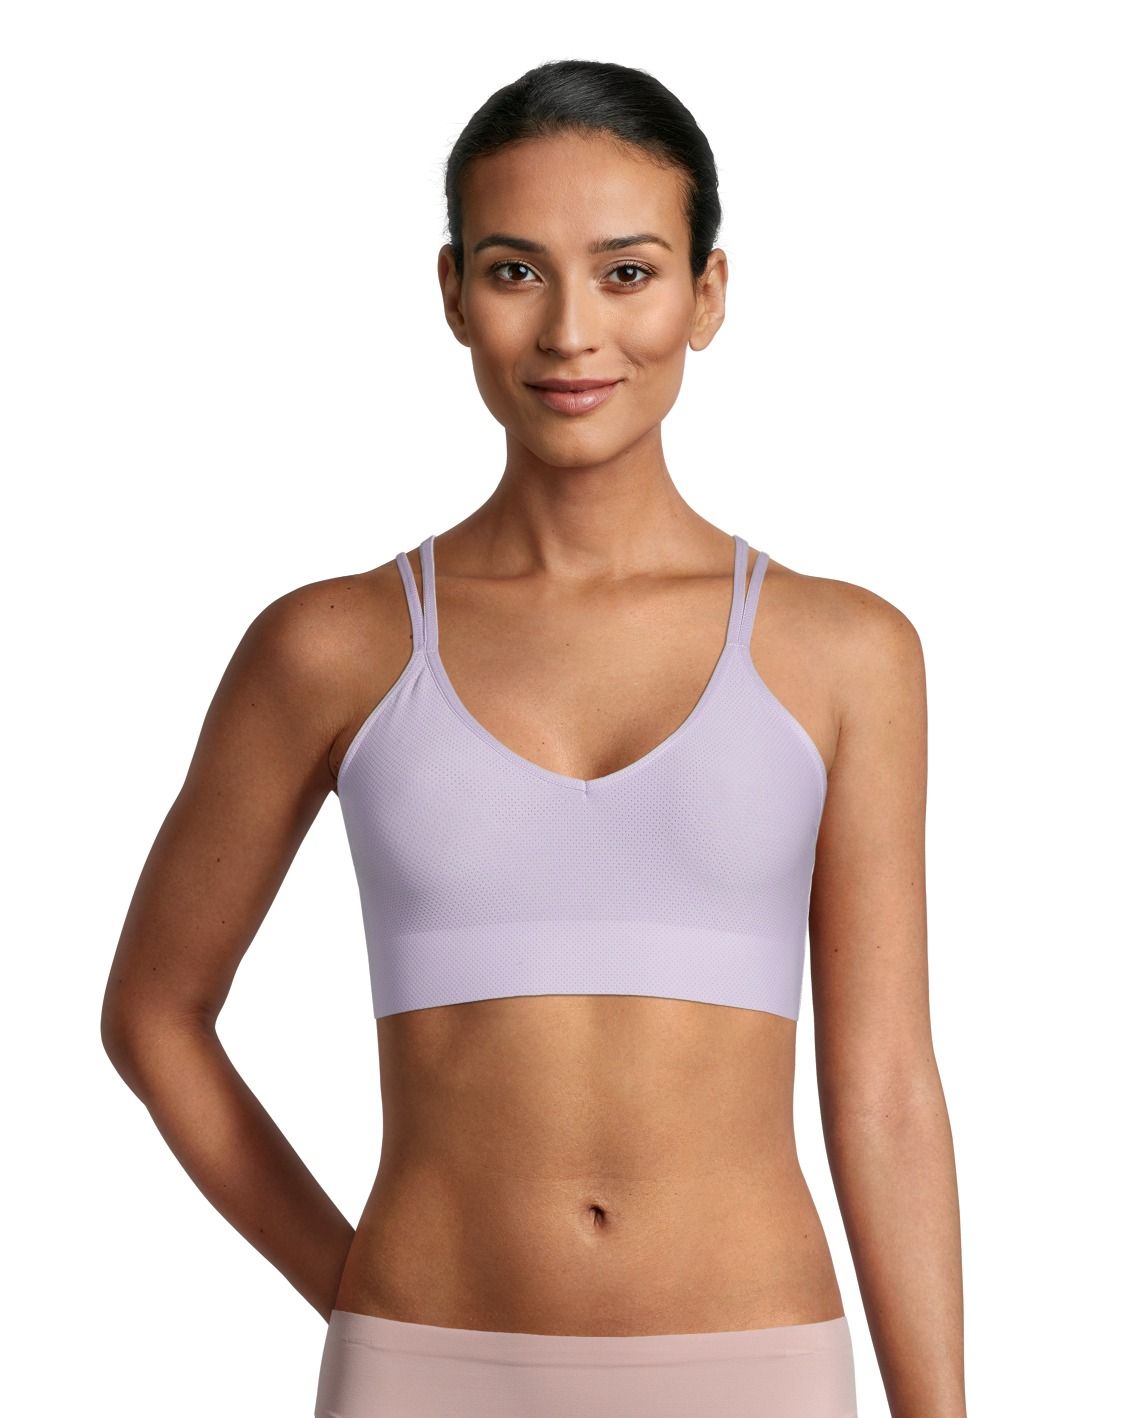 Women Mesh Bralette Invisible Sports Gym Bra Woman Sports Top With